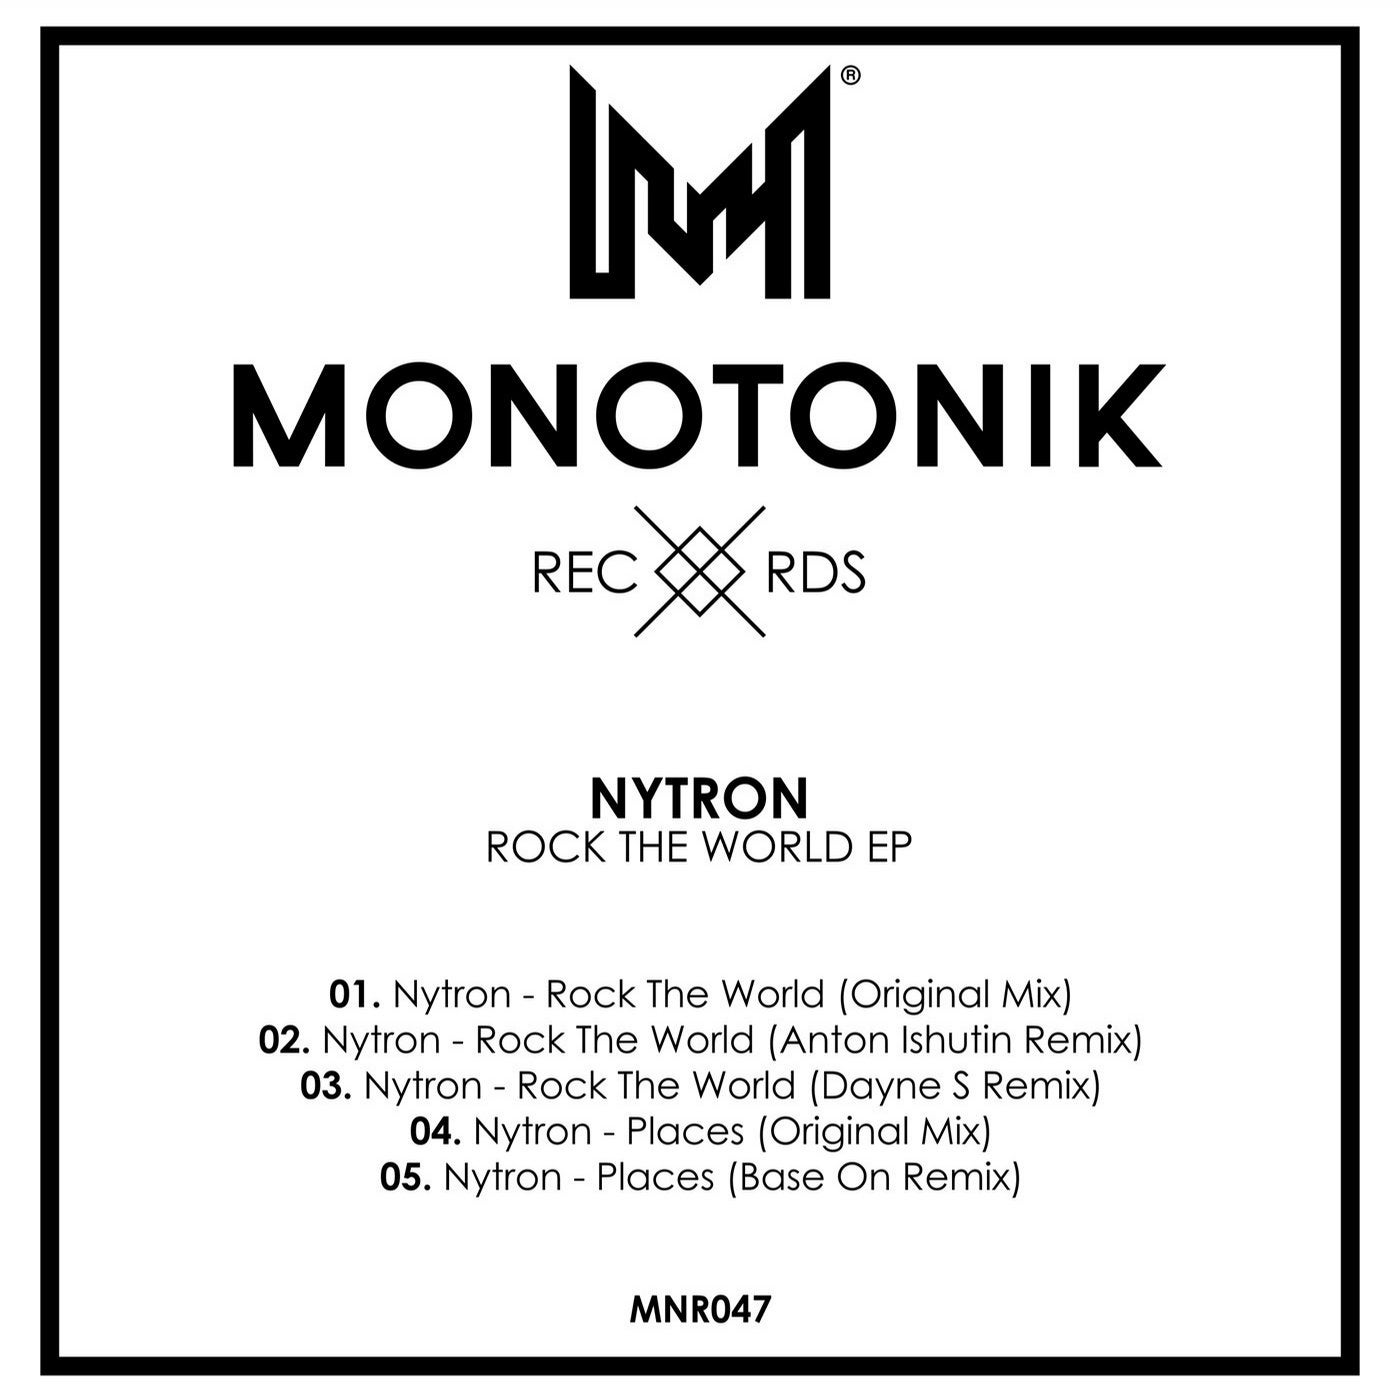 Rock The World EP